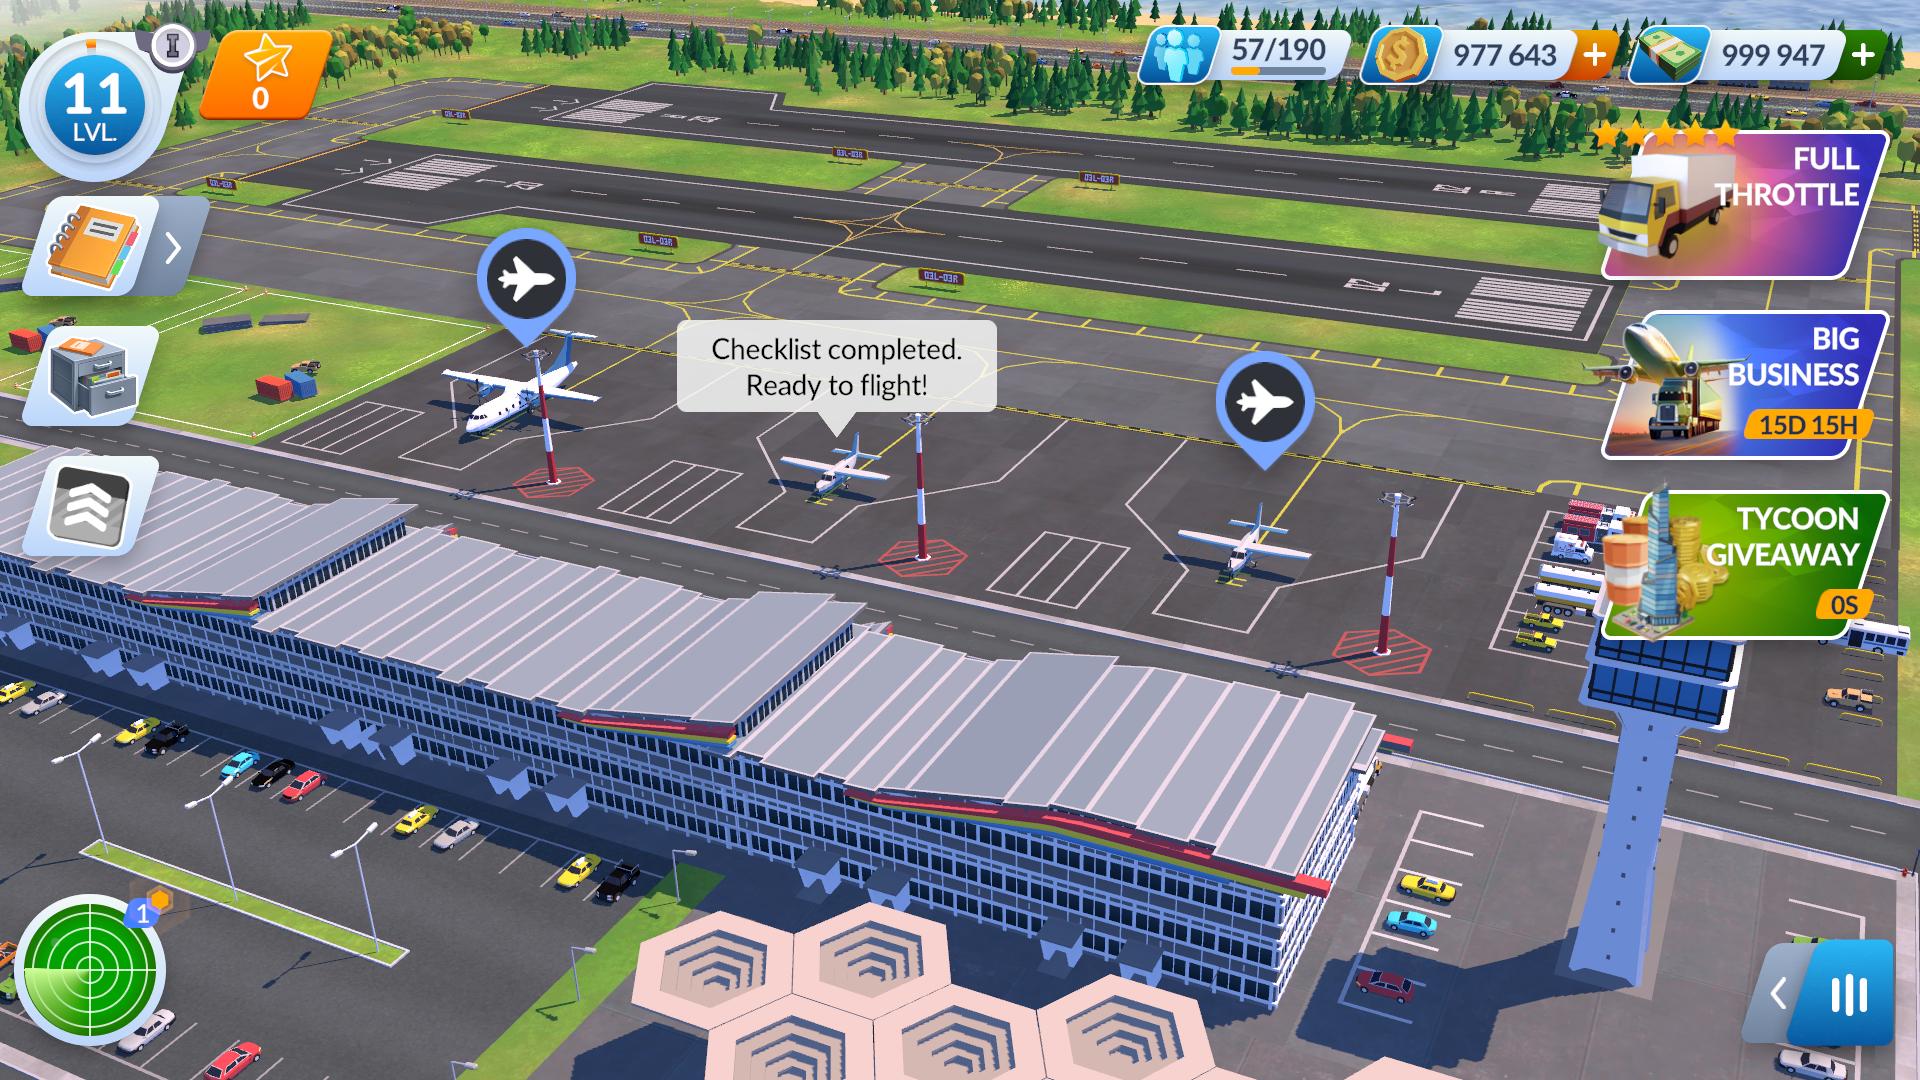 Télécharger Transport Manager Tycoon pour Android A.n.d.r.o.i.d. .5...0. .a.n.d. .m.o.r.e gratuit.